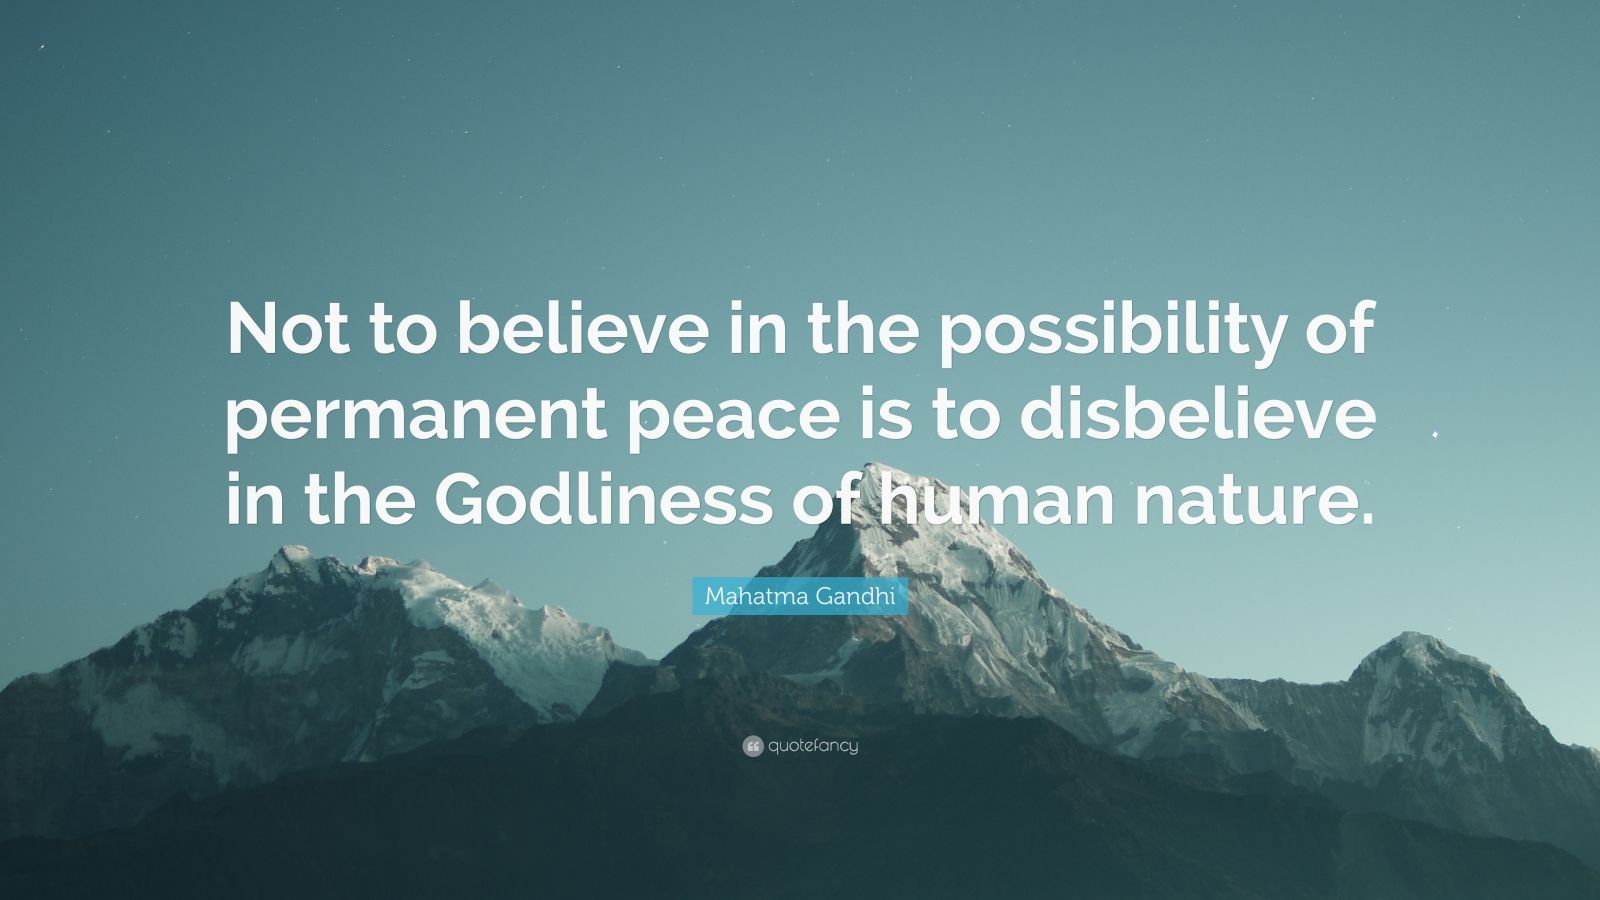 Mahatma Gandhi Quote: “Not to believe in the possibility of permanent ...